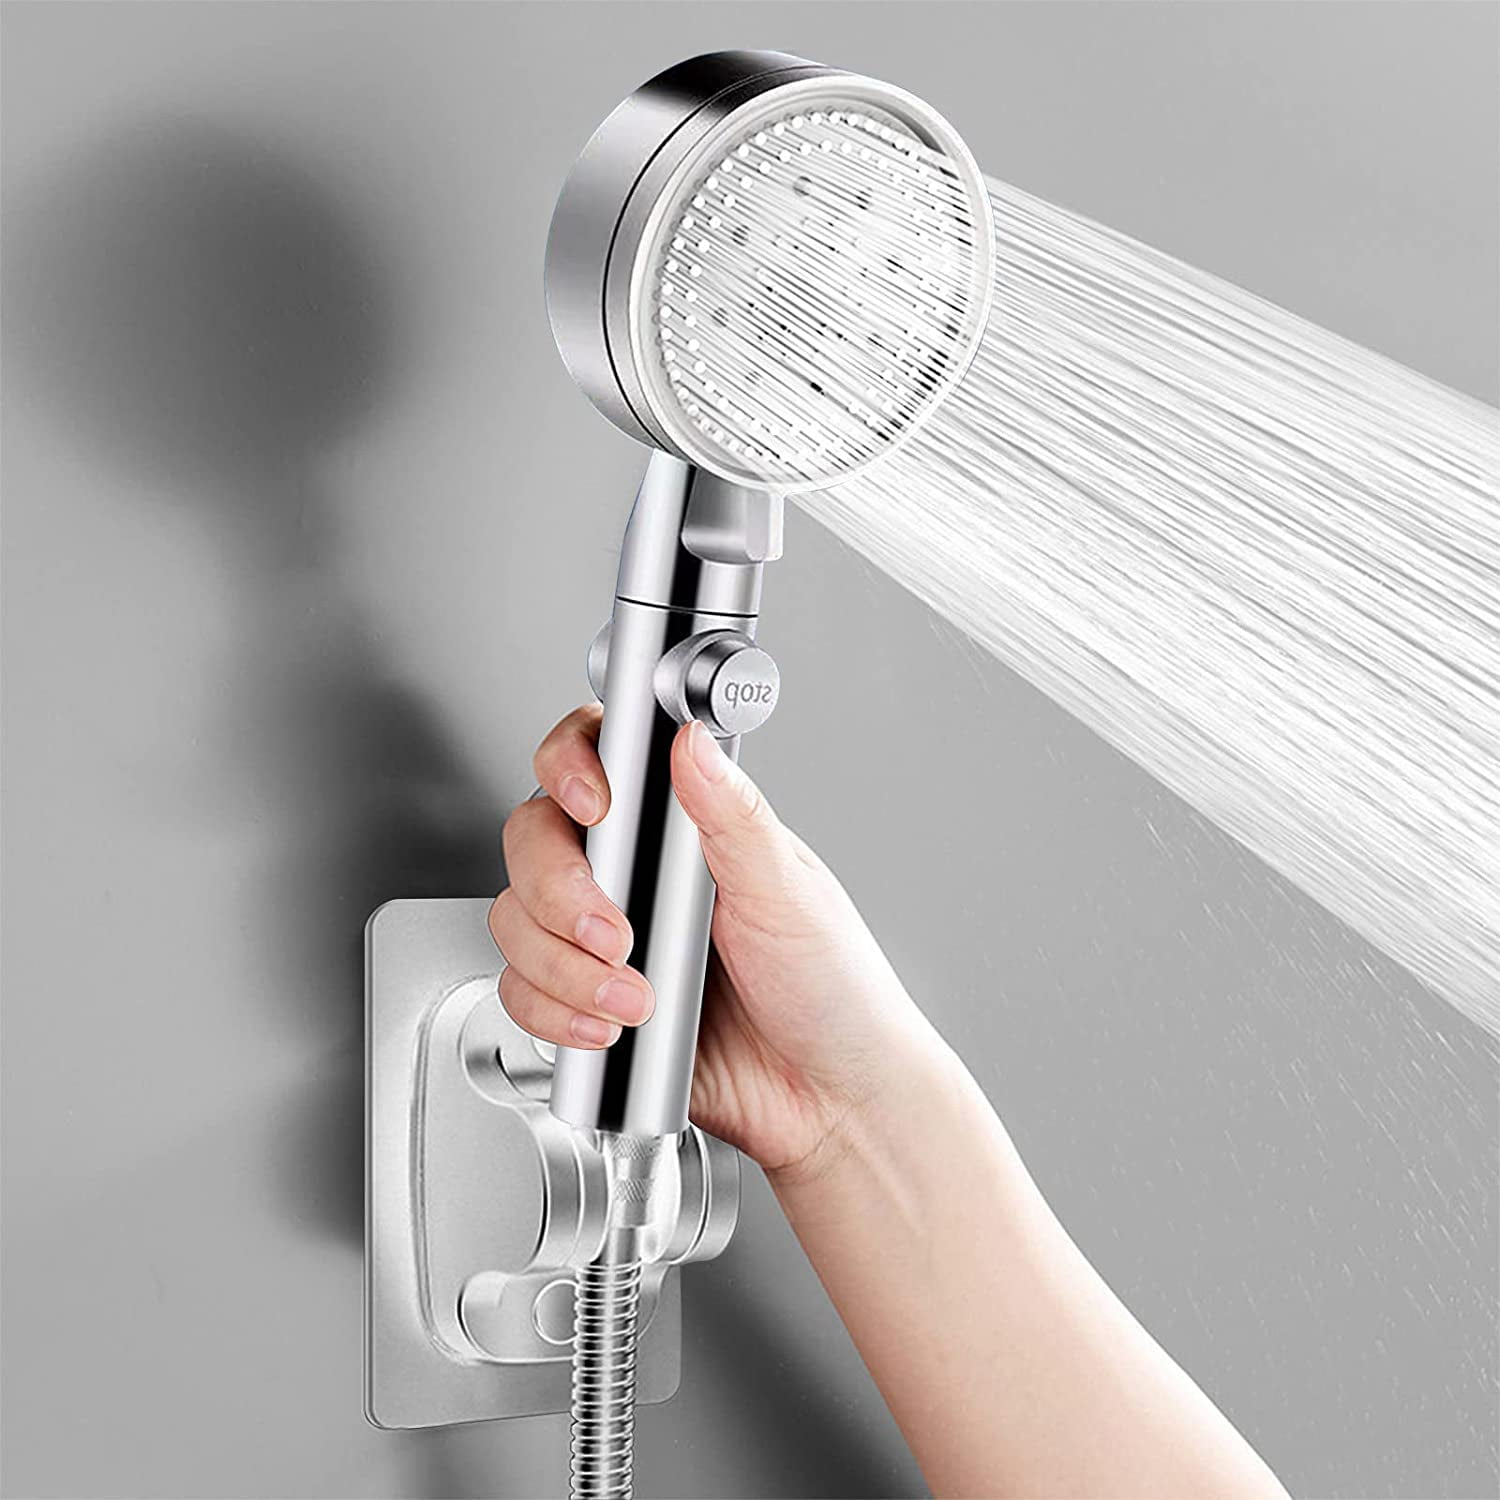 Multi-Functional Pressure Shower Head with Modes, High Pressure Handheld Shower Head with ON/Off for Home Bathhoom, Accessories - Walmart.com